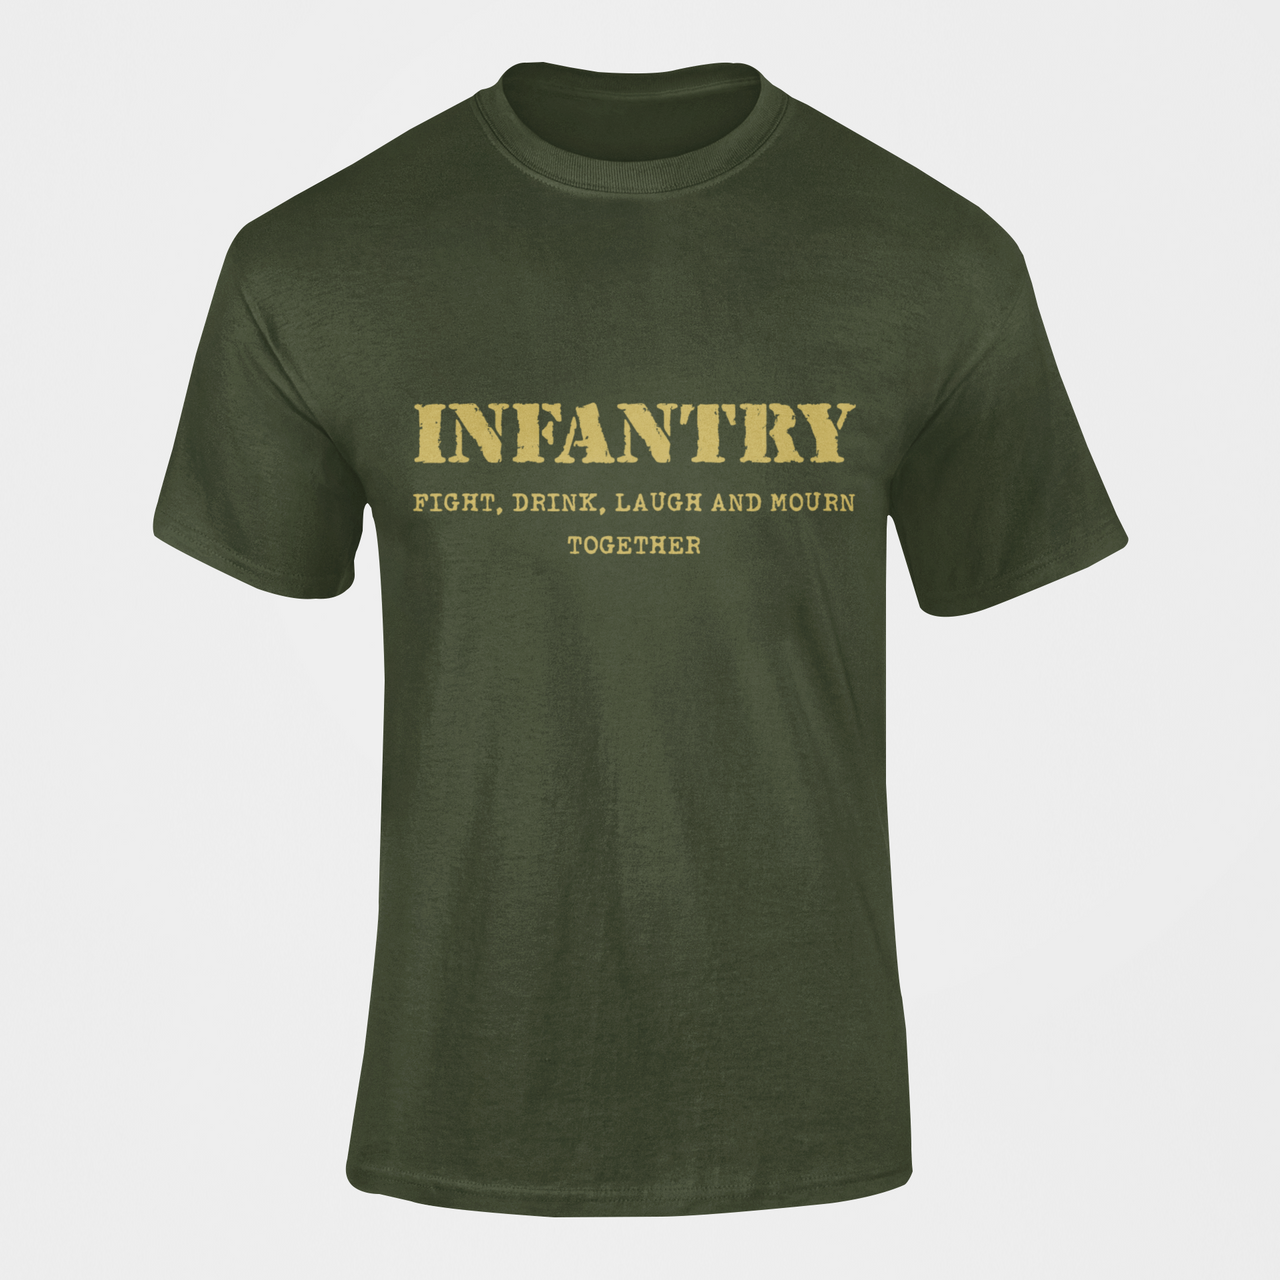 Infantry T-shirt - Fight, Drink, Laugh and Mourn Together (Men)